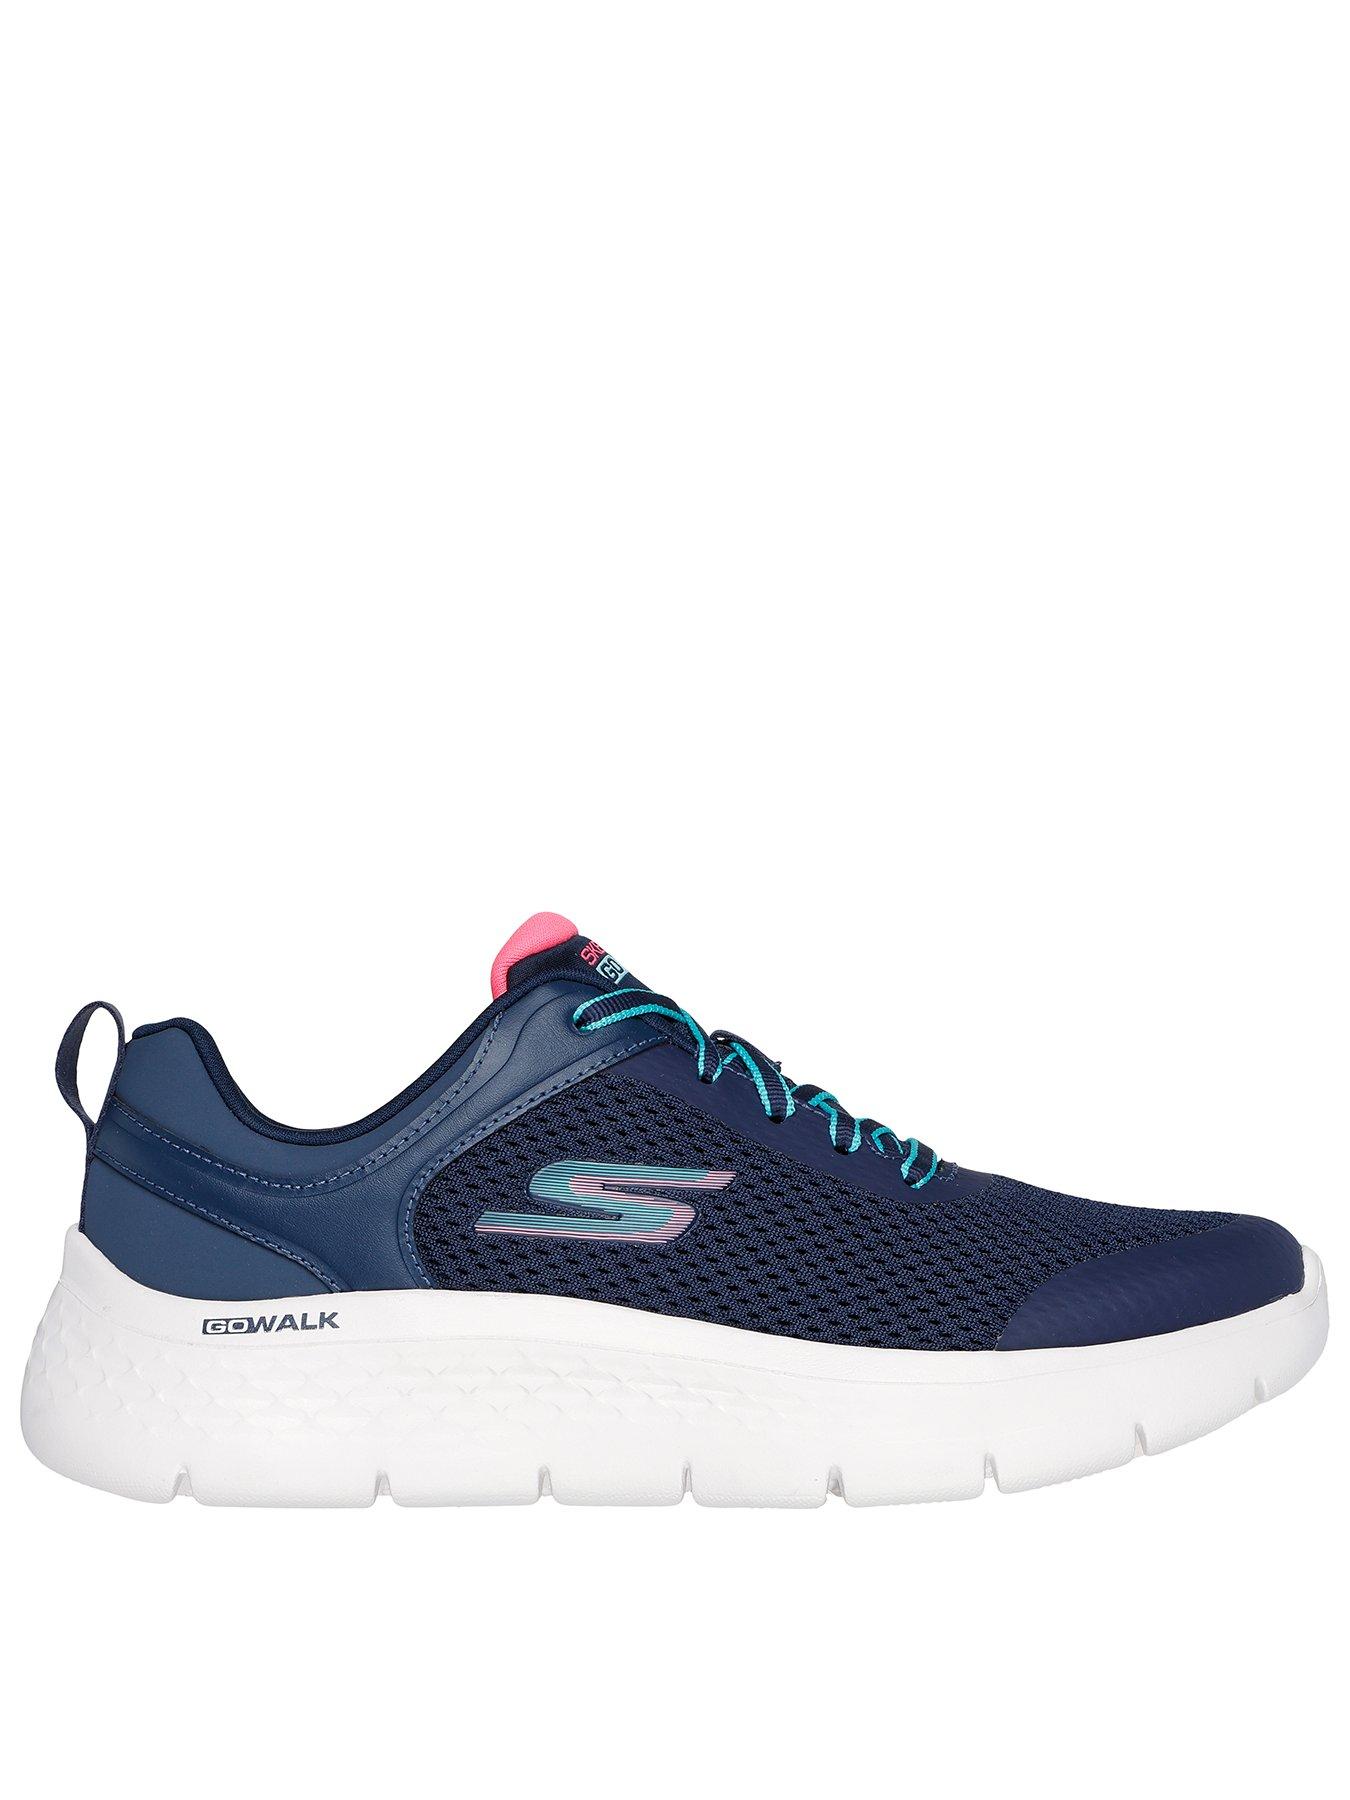 Skechers Ireland on X: Classic air cushioned style meets updated